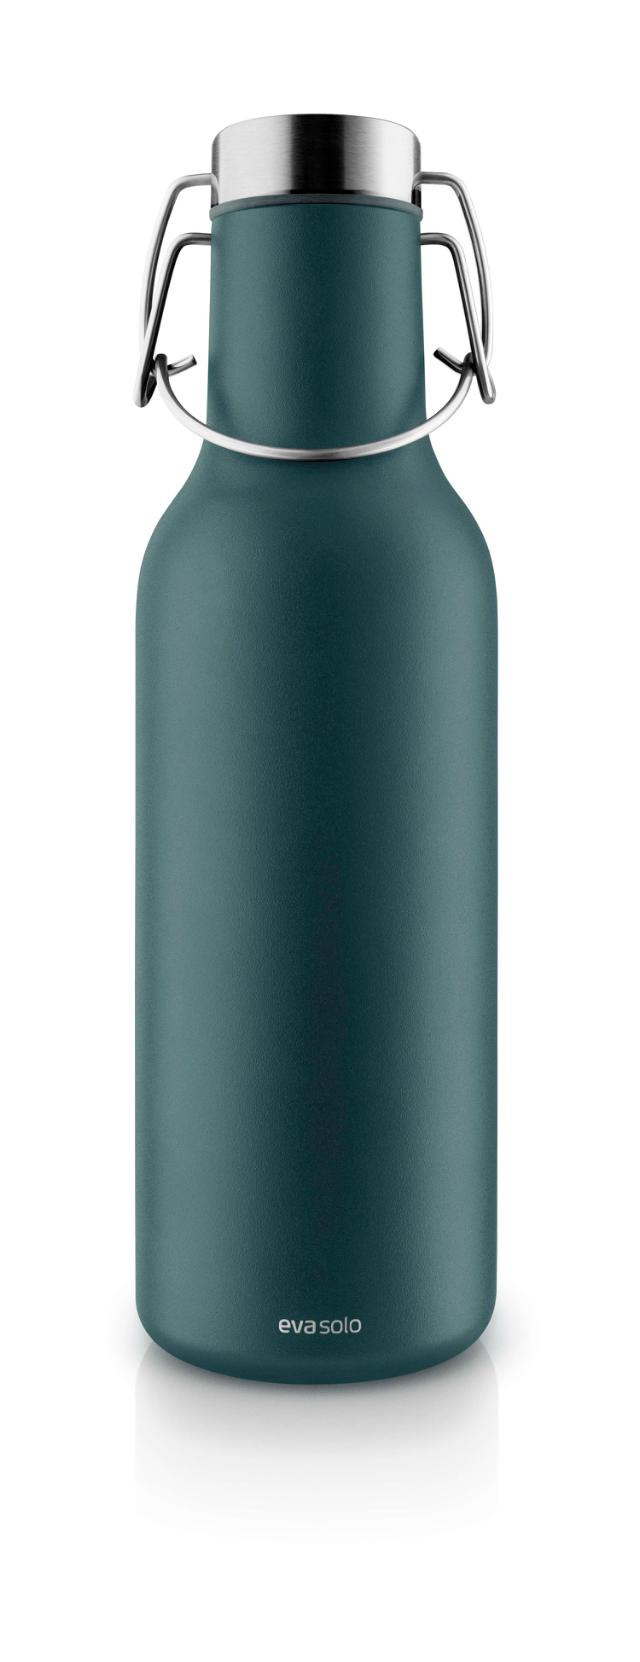 Cool thermo flask - 0.7 liters - Petrol